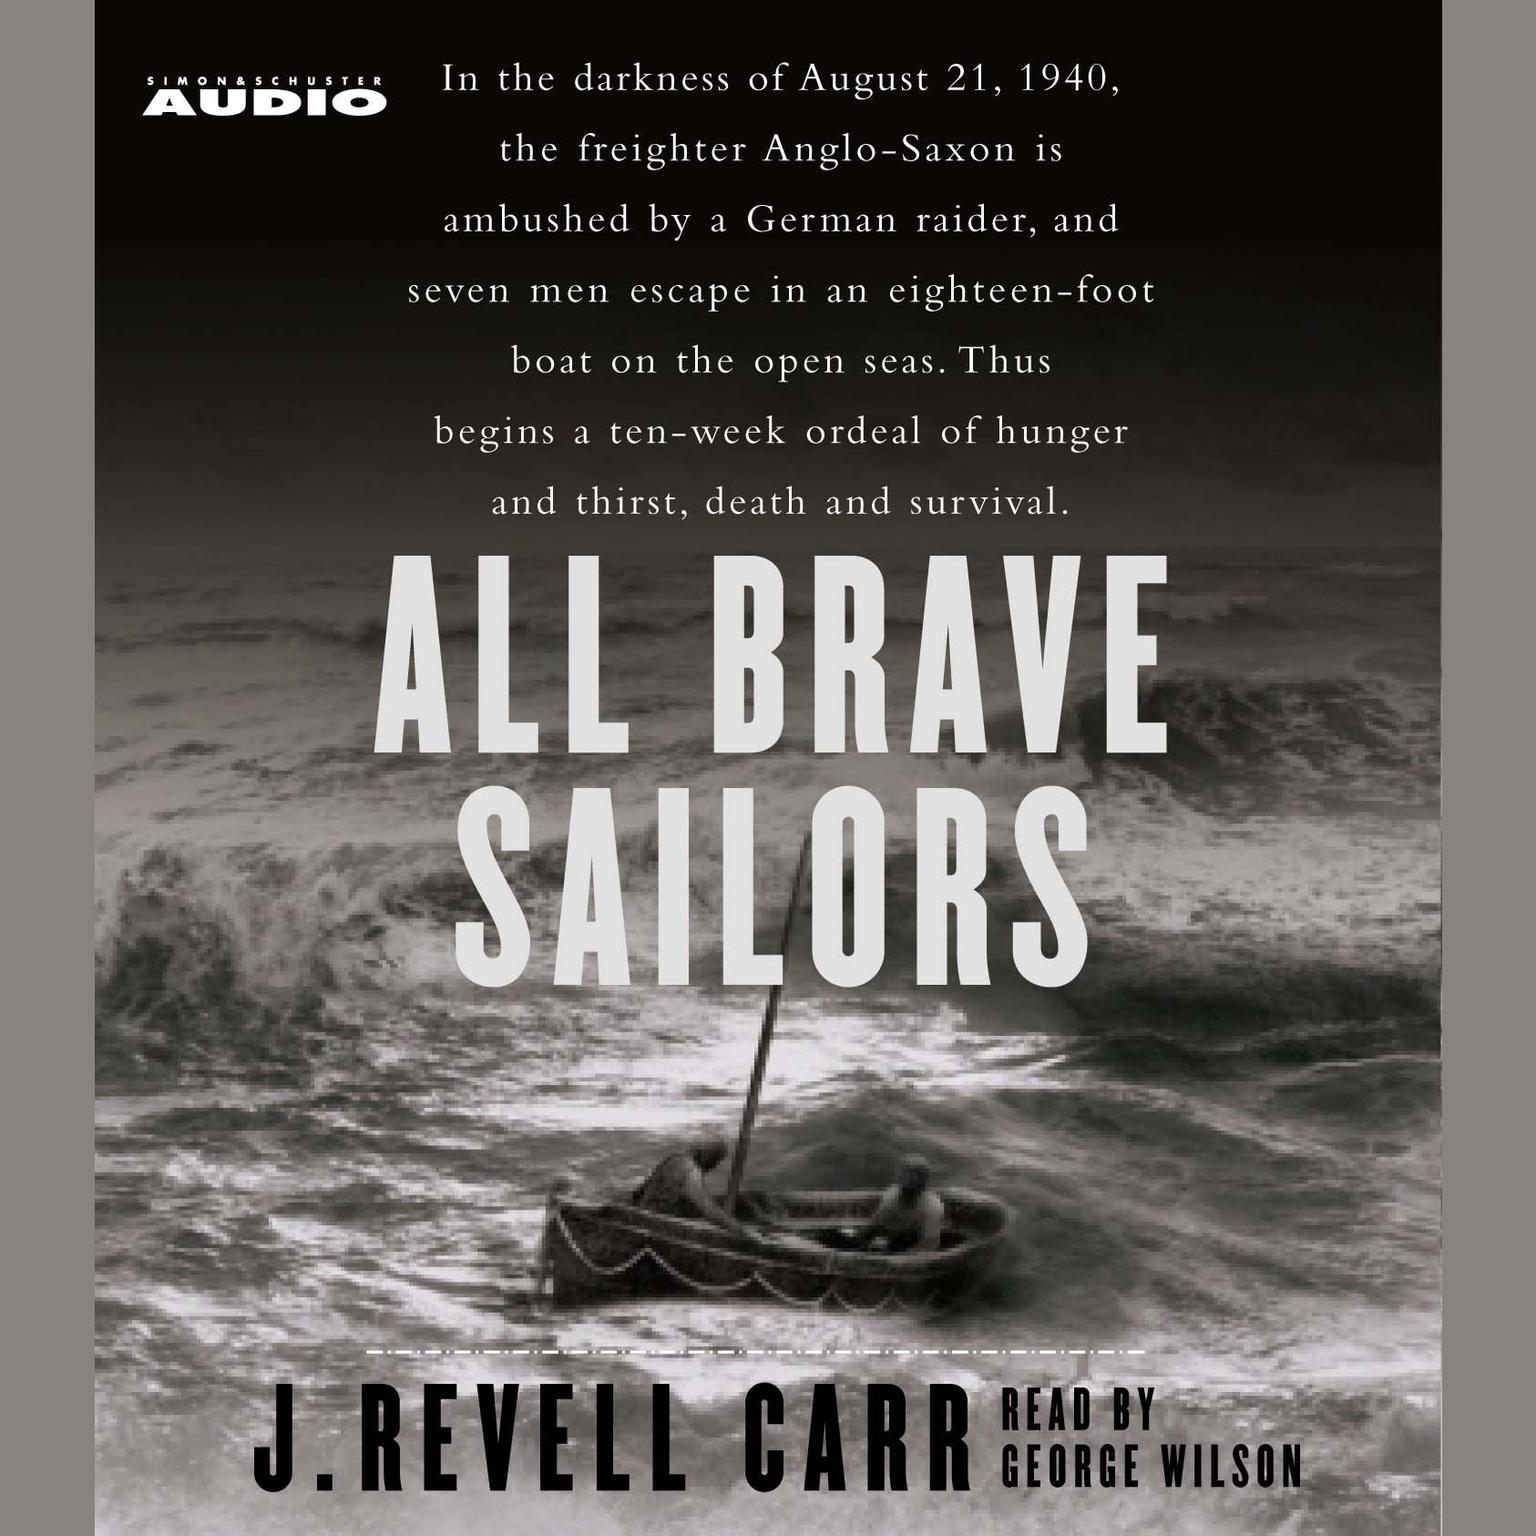 All Brave Sailors (Abridged): The Sinking of the Anglo Saxon, August 21, 1940 Audiobook, by J. Revell Carr